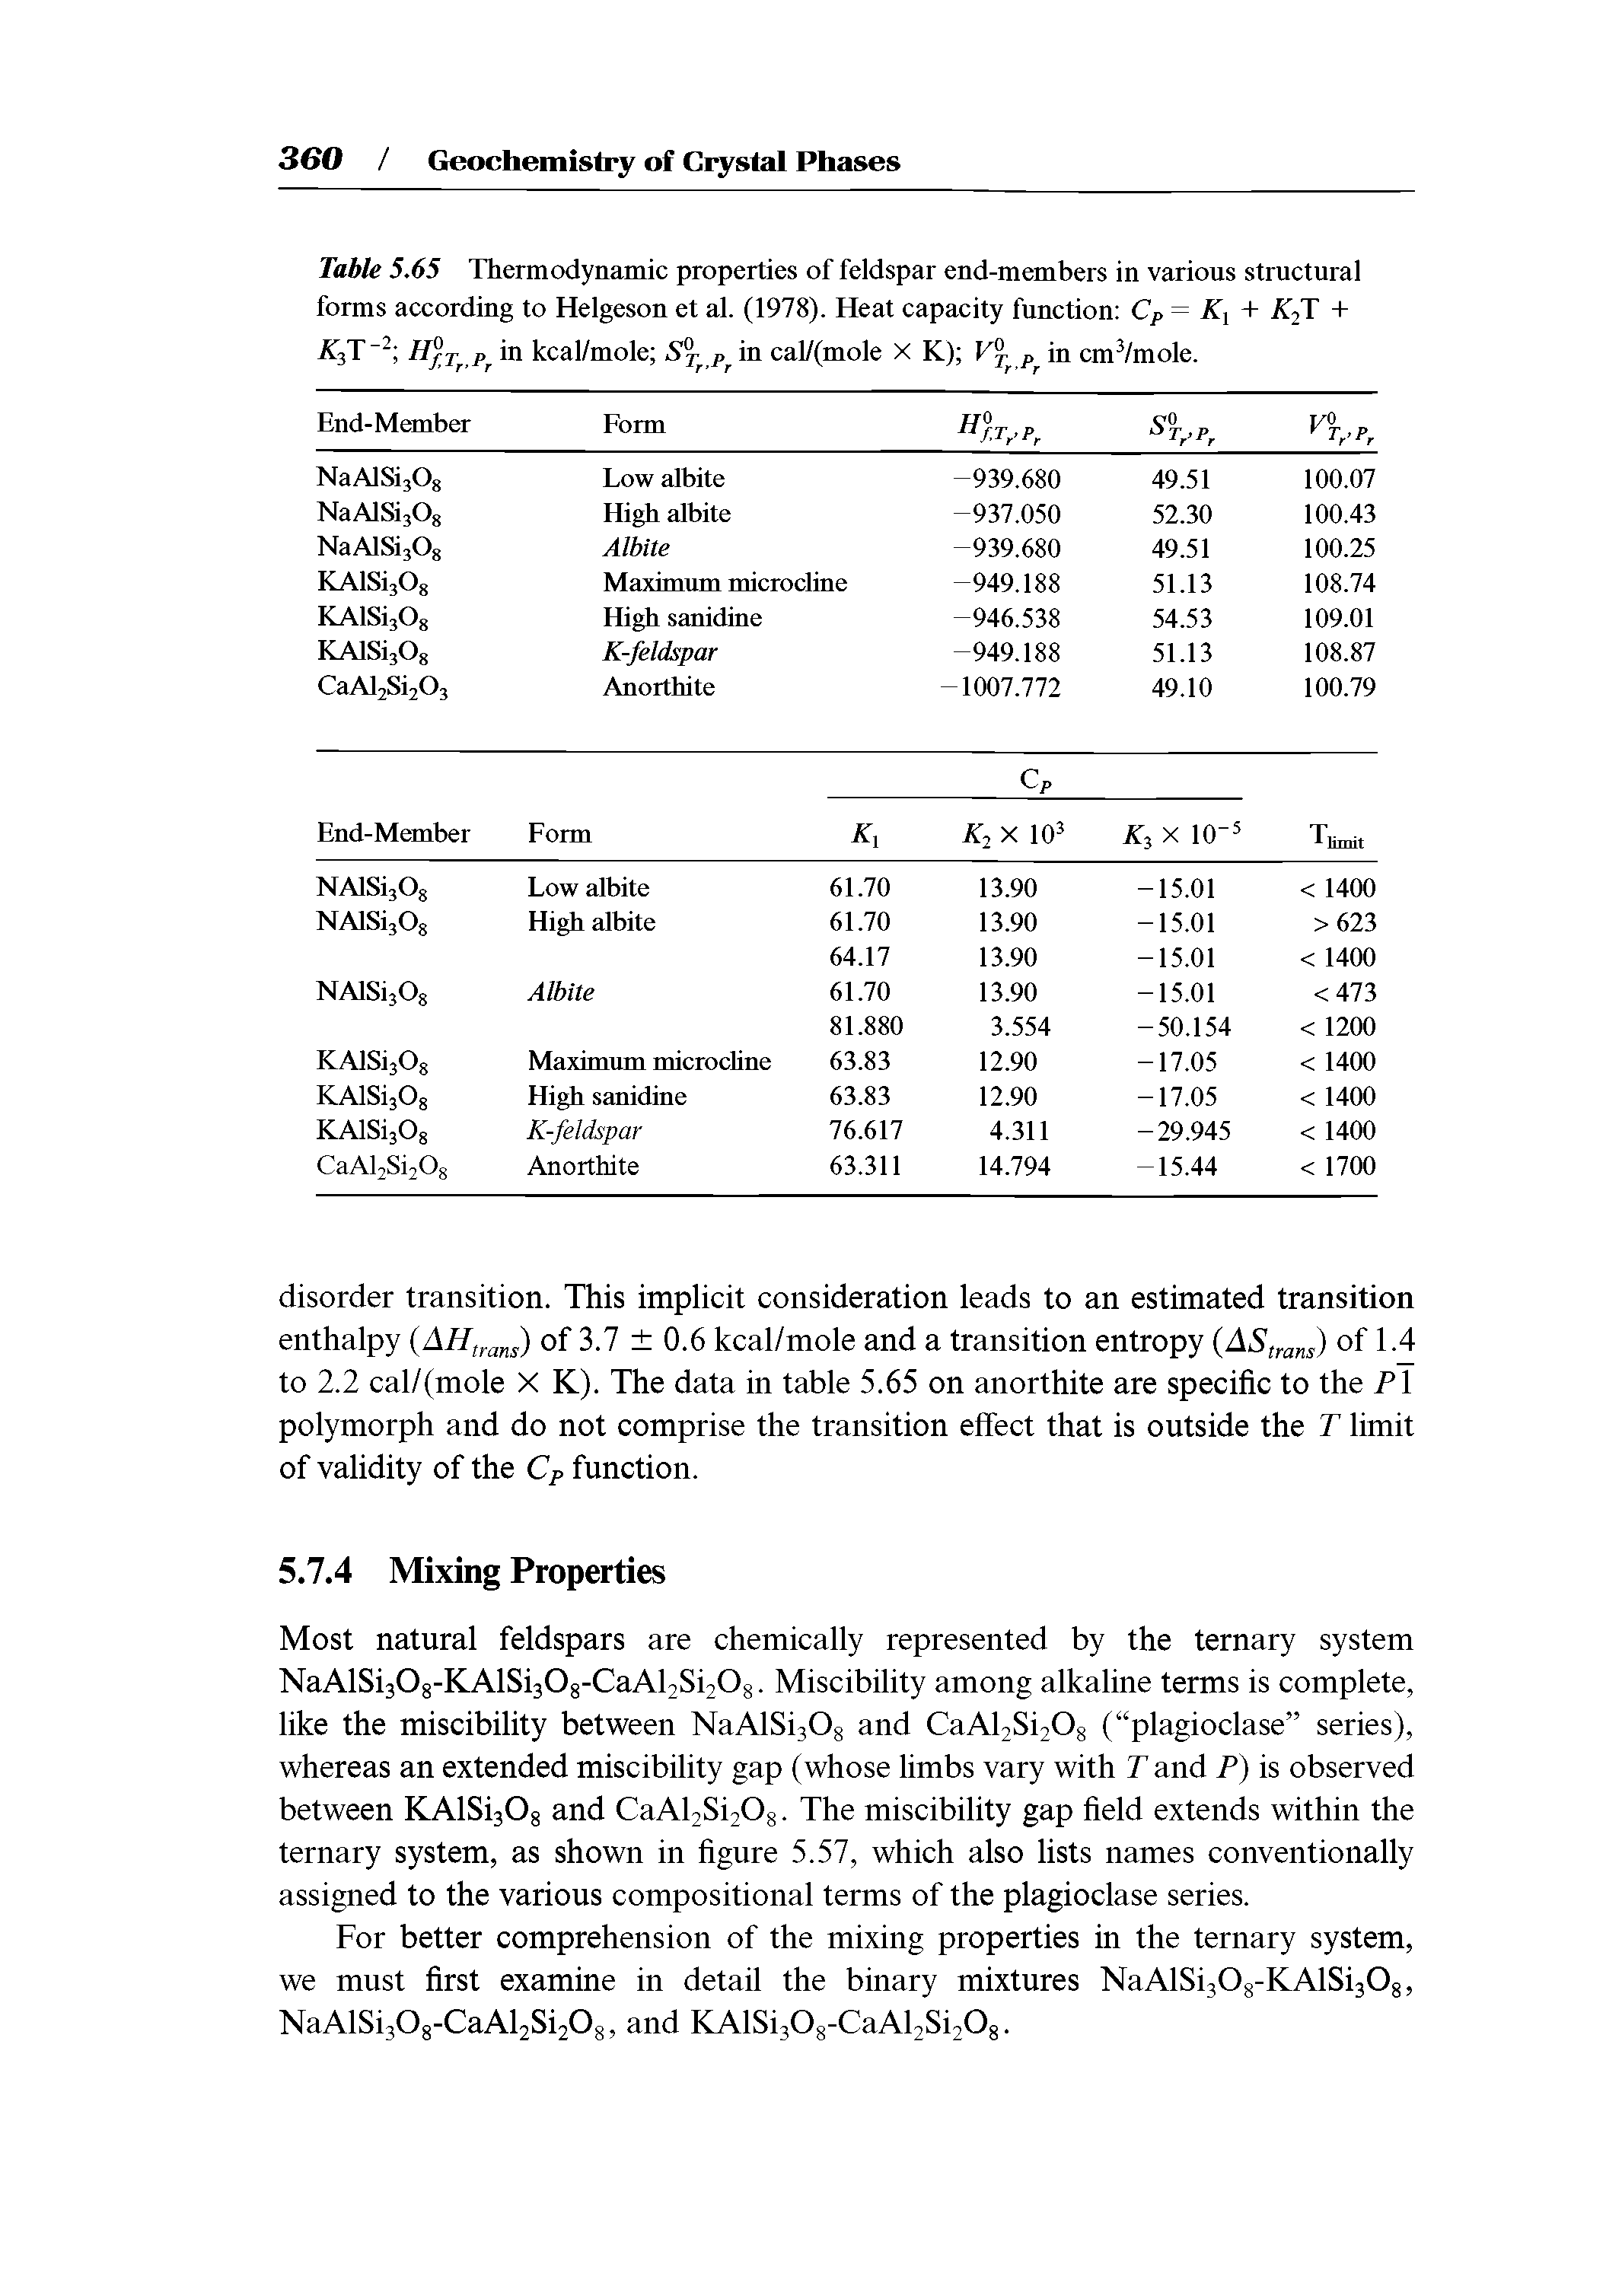 Table 5.65 Thermodynamic properties of feldspar end-members in various structural forms according to Helgeson et al. (1978). Heat capacity function Cp= K + K Y +...